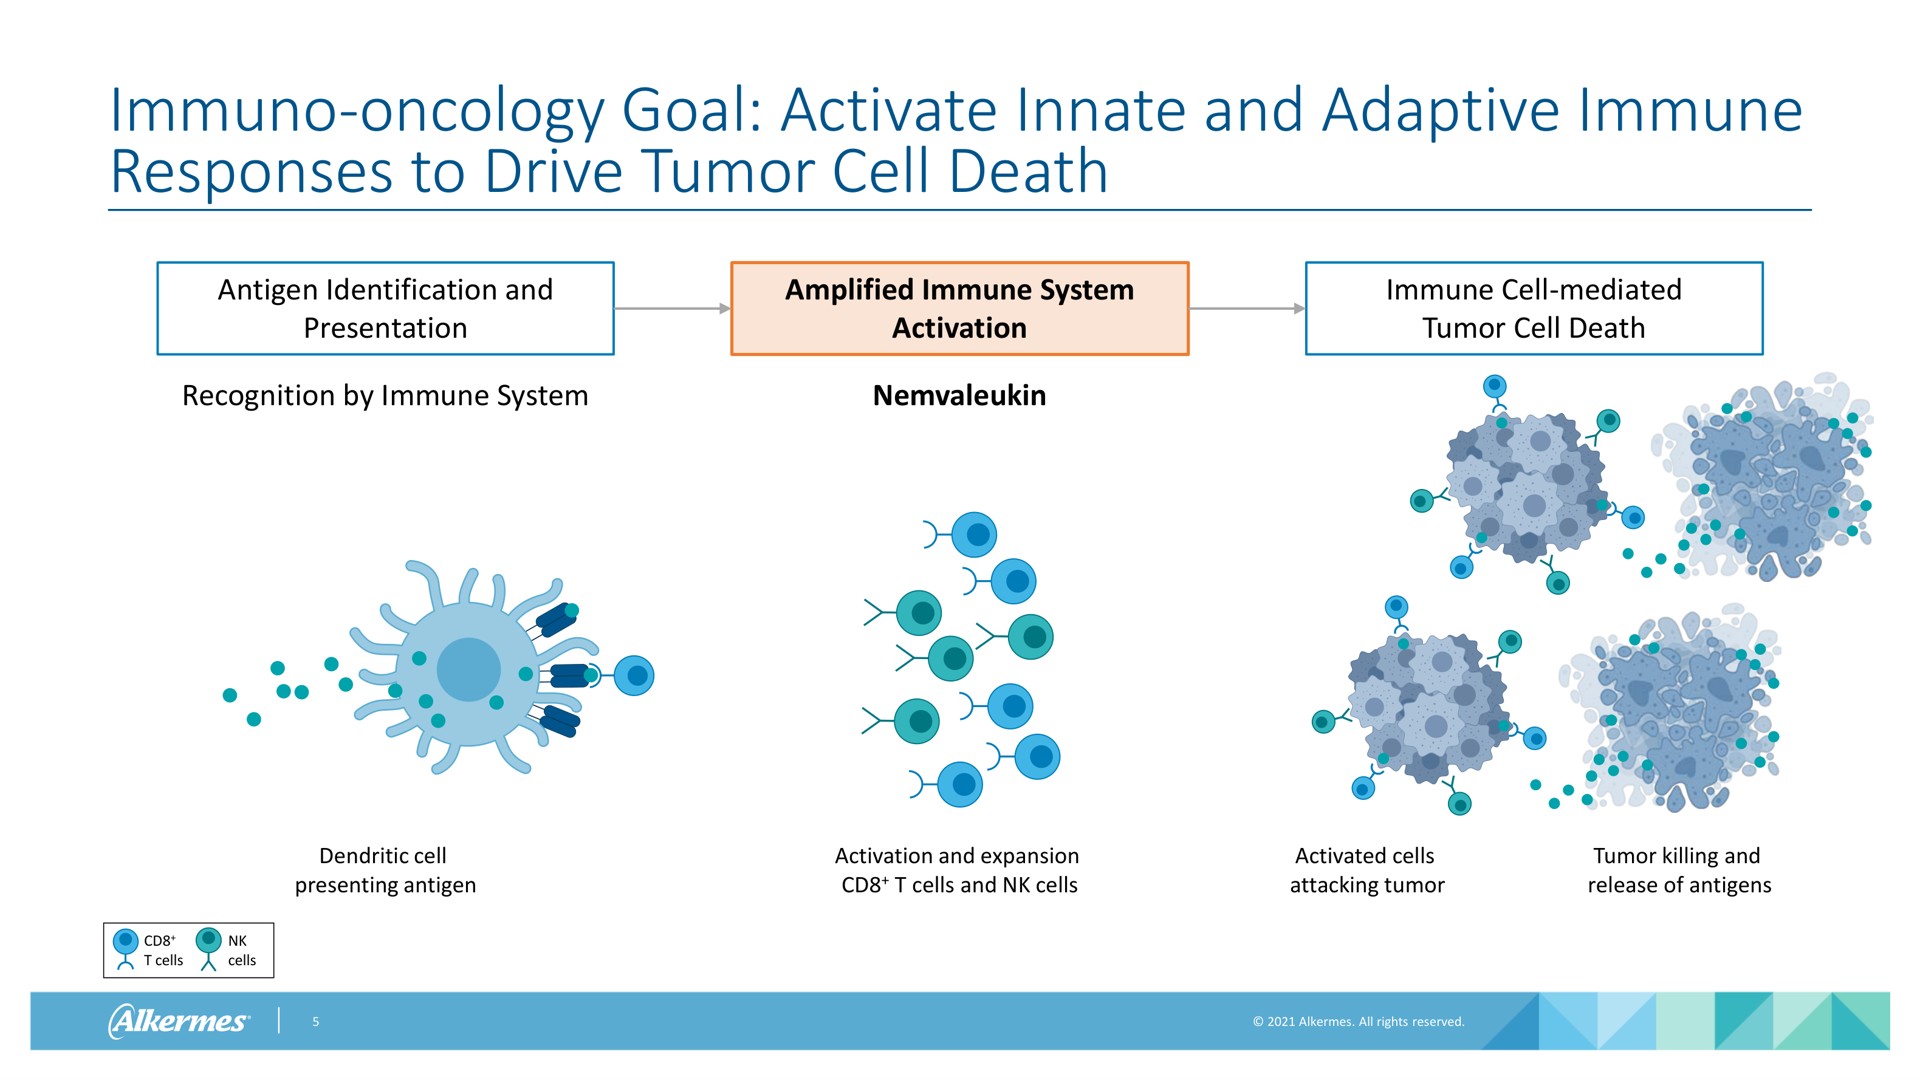 oncology goal activate innate and adaptive immune responses to drive tumor cell death antigen identification and presentation amplified immune system activation immune cell mediated tumor cell death recognition by immune system dendritic cell presenting antigen activation and expansion cells and cells activated cells attacking tumor tumor killing and release of antigens cells cells | Alkermes